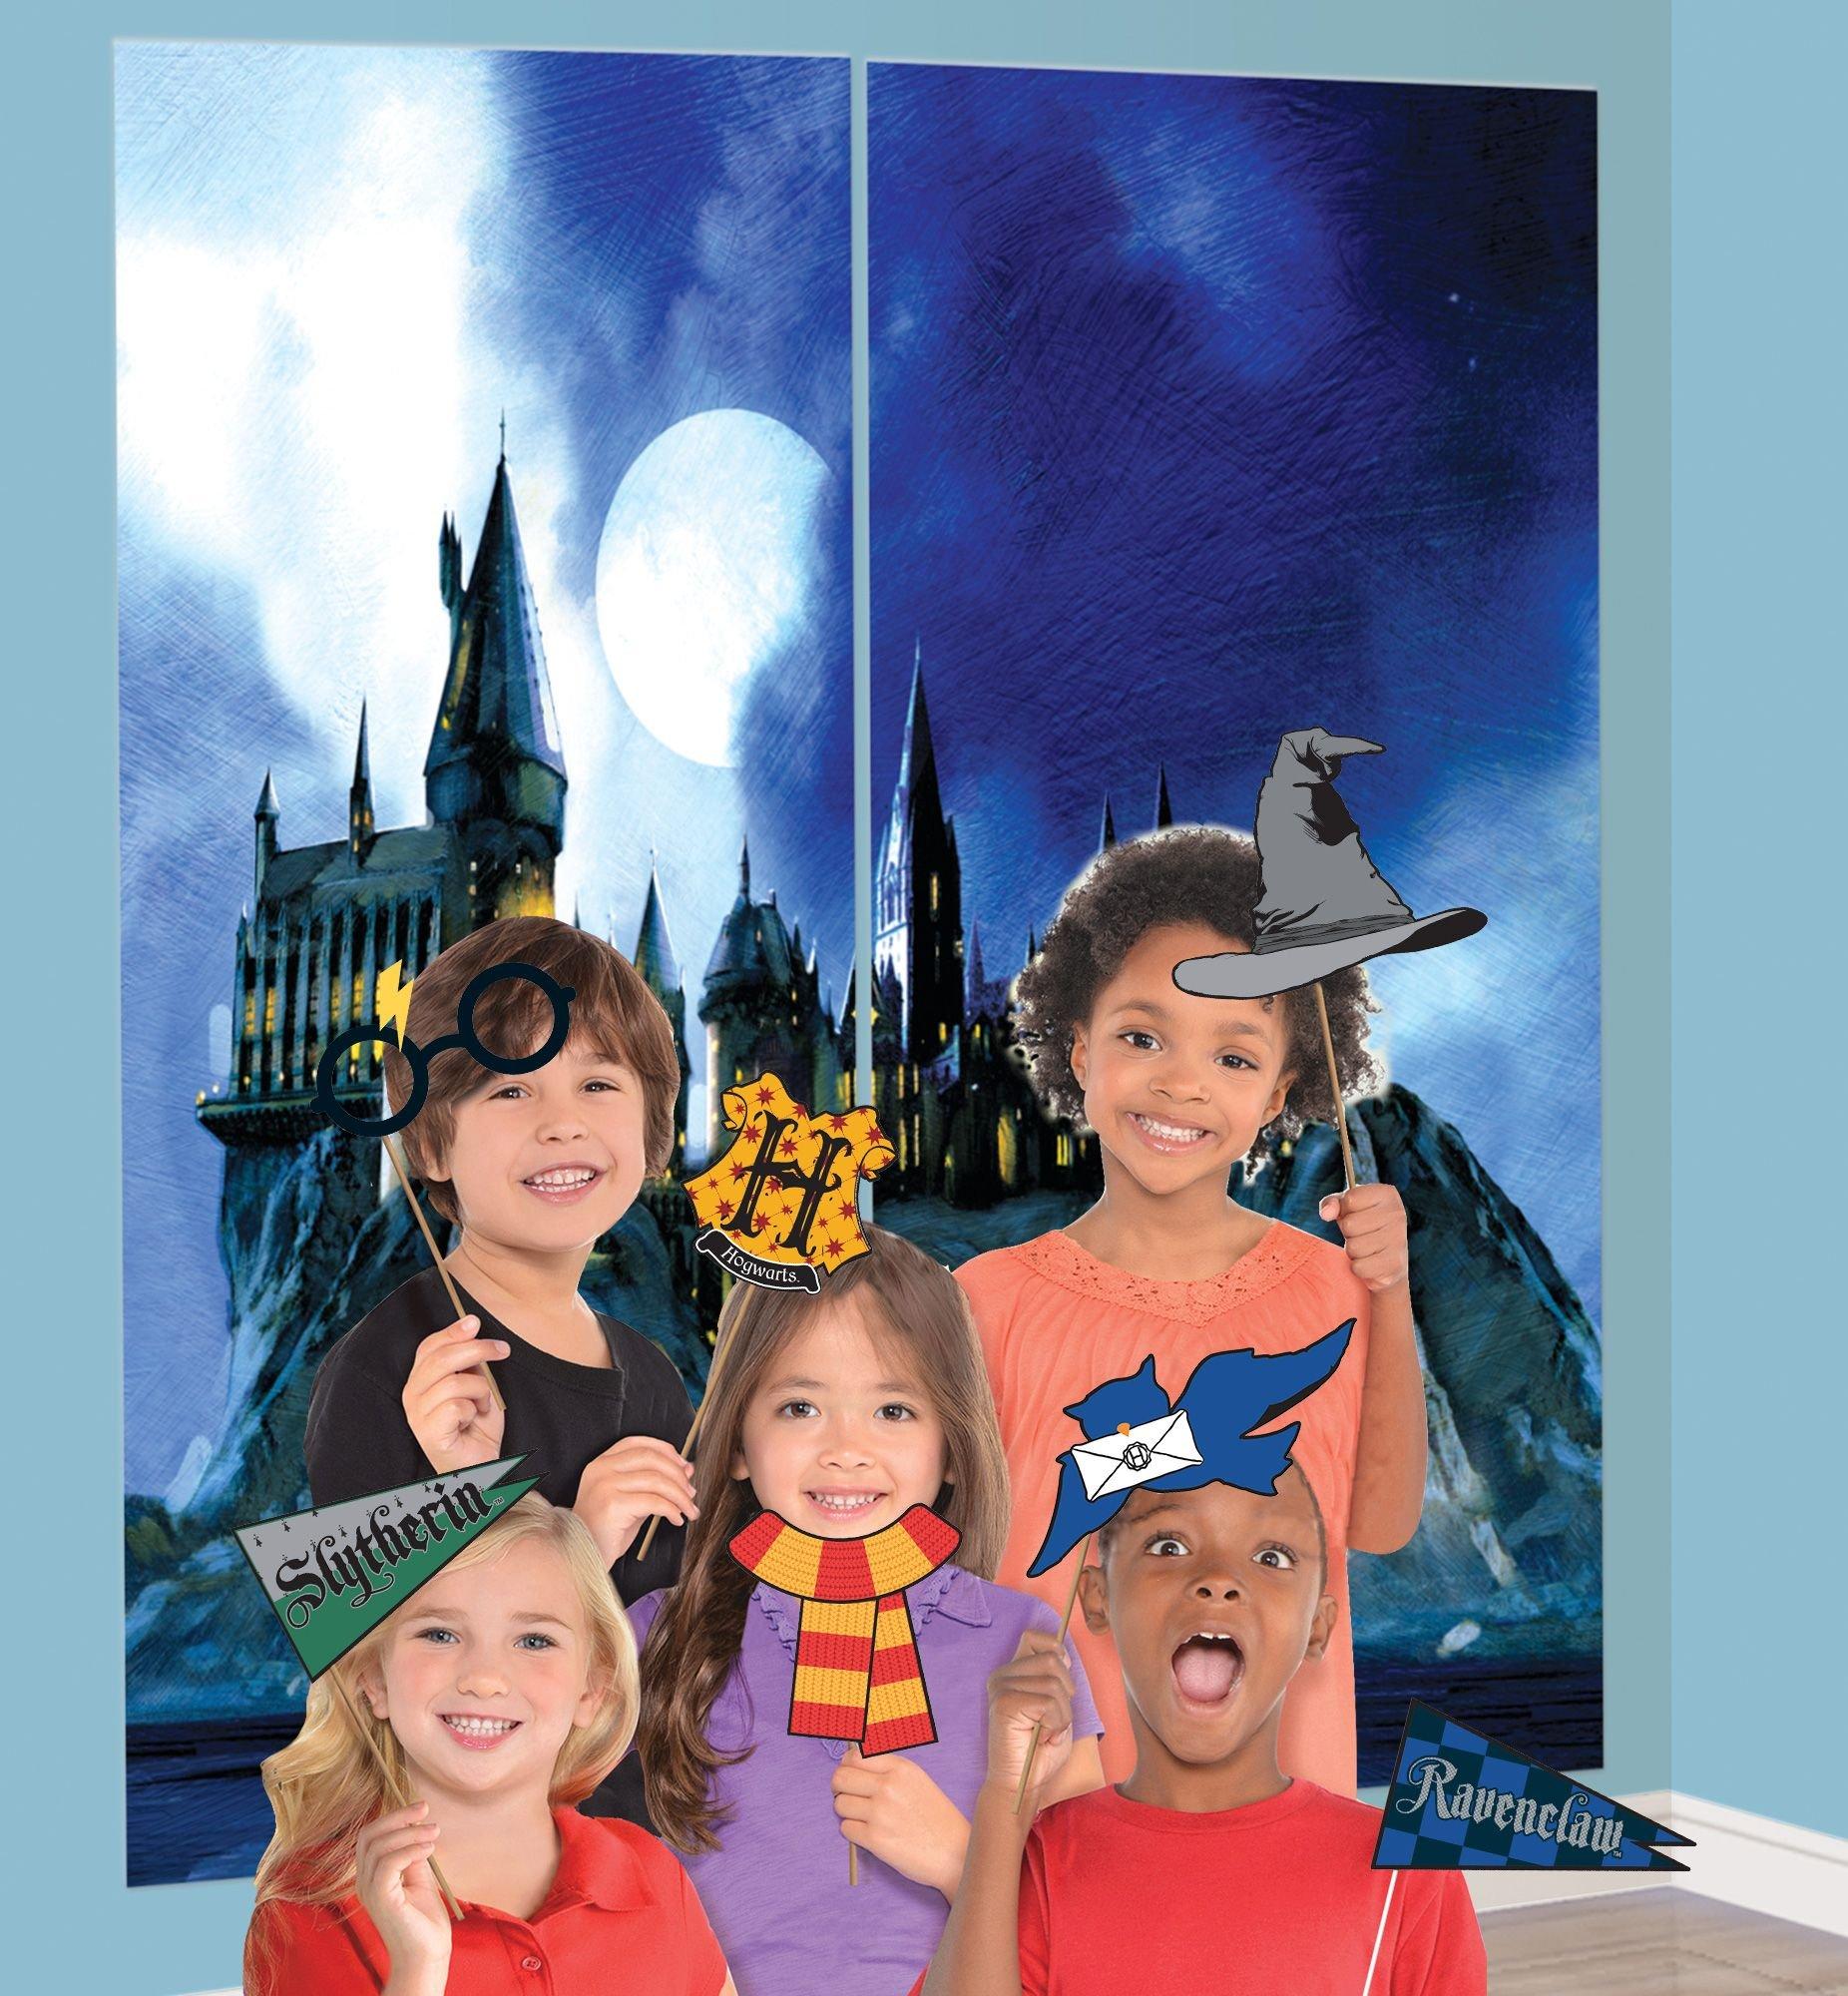 Harry Potter Photo Booth Props Instant by ThePartyFactoryWorld